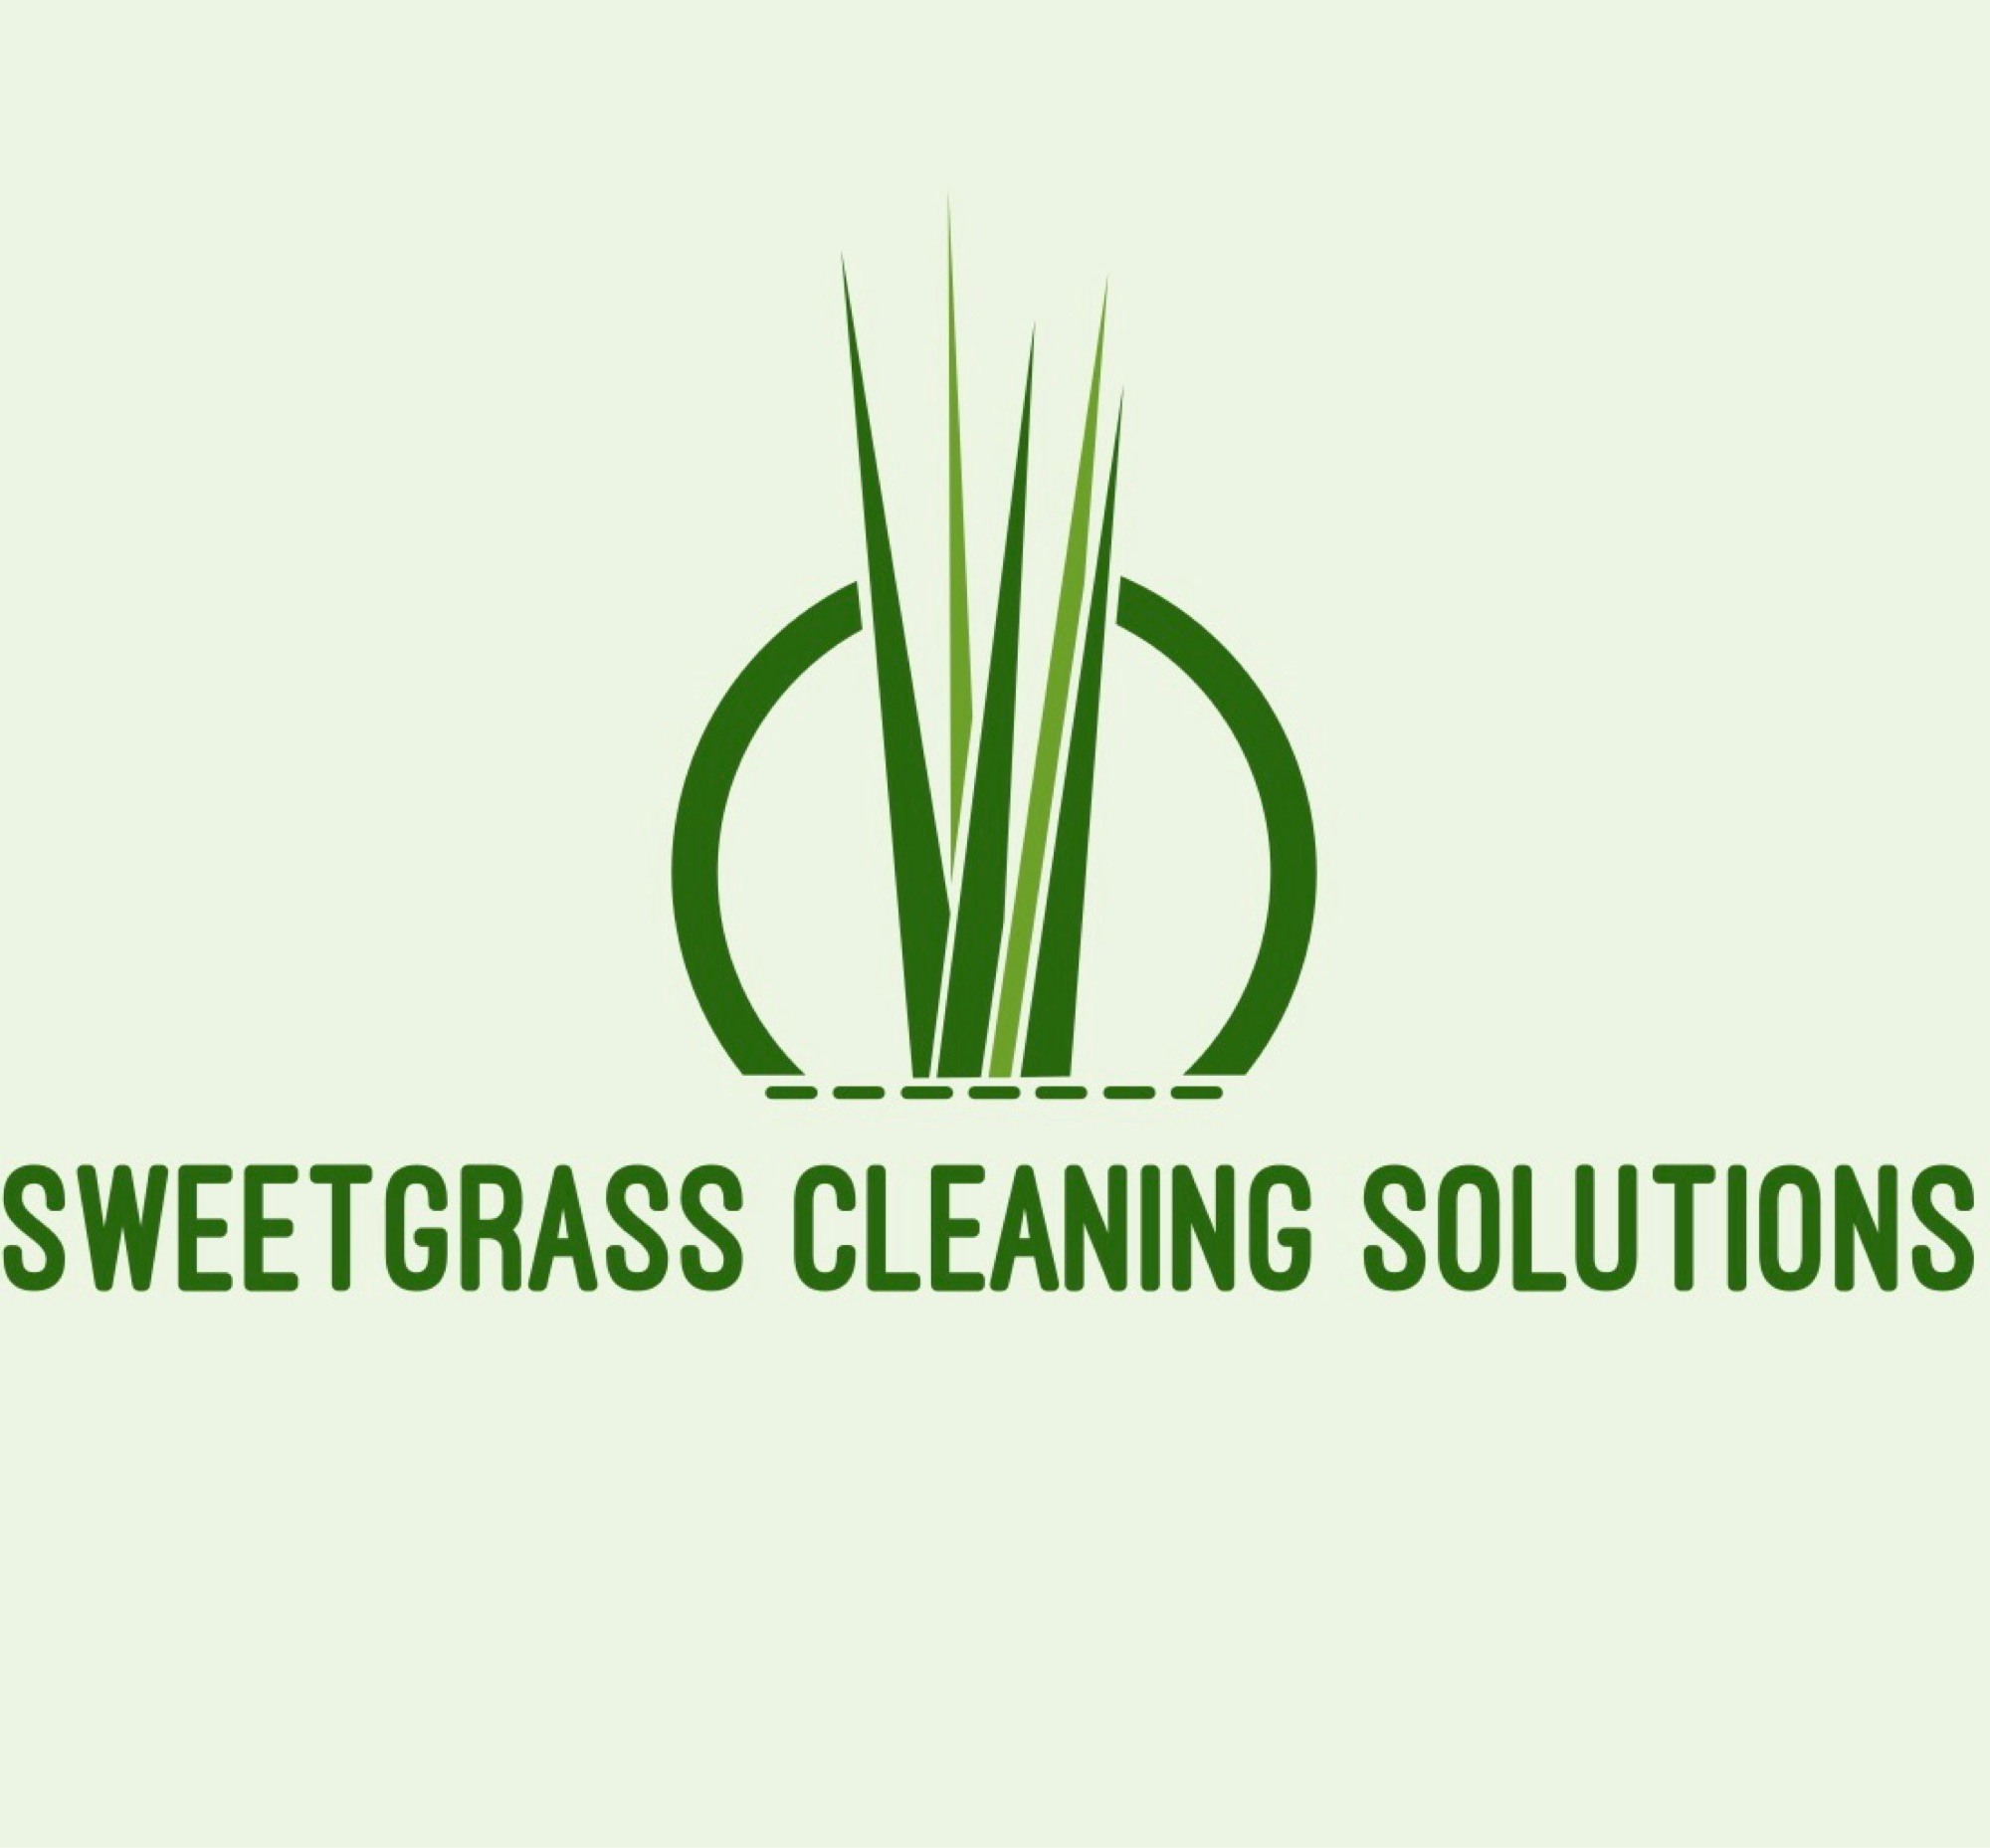 Sweetgrass Cleaning Solutions Logo